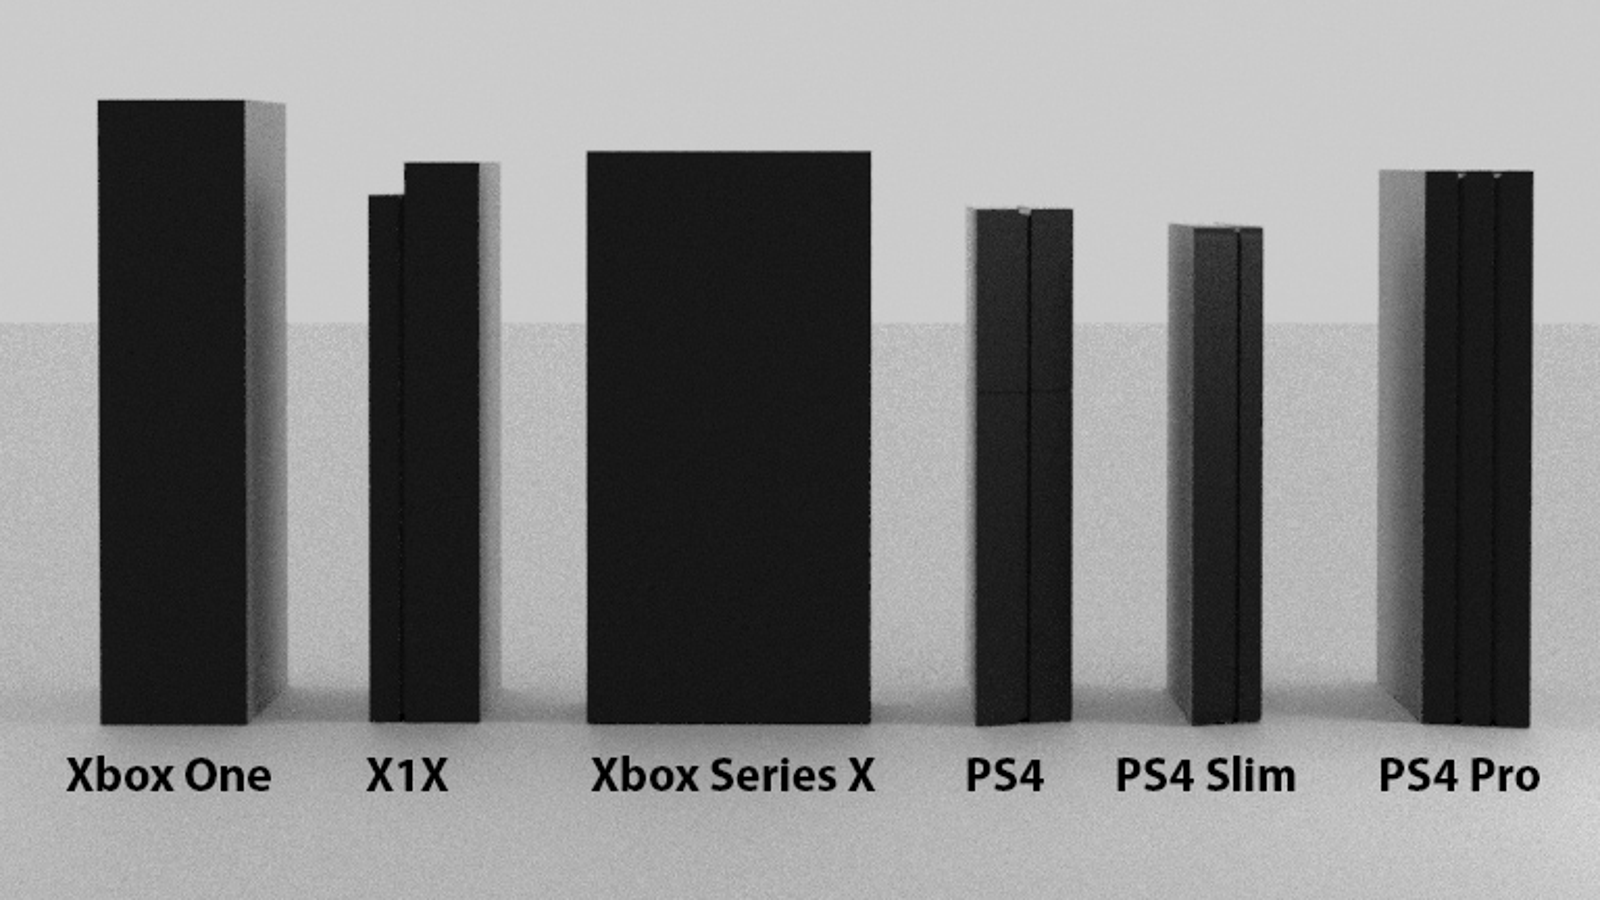 Xbox Series X console design, including ports, size and dimensions